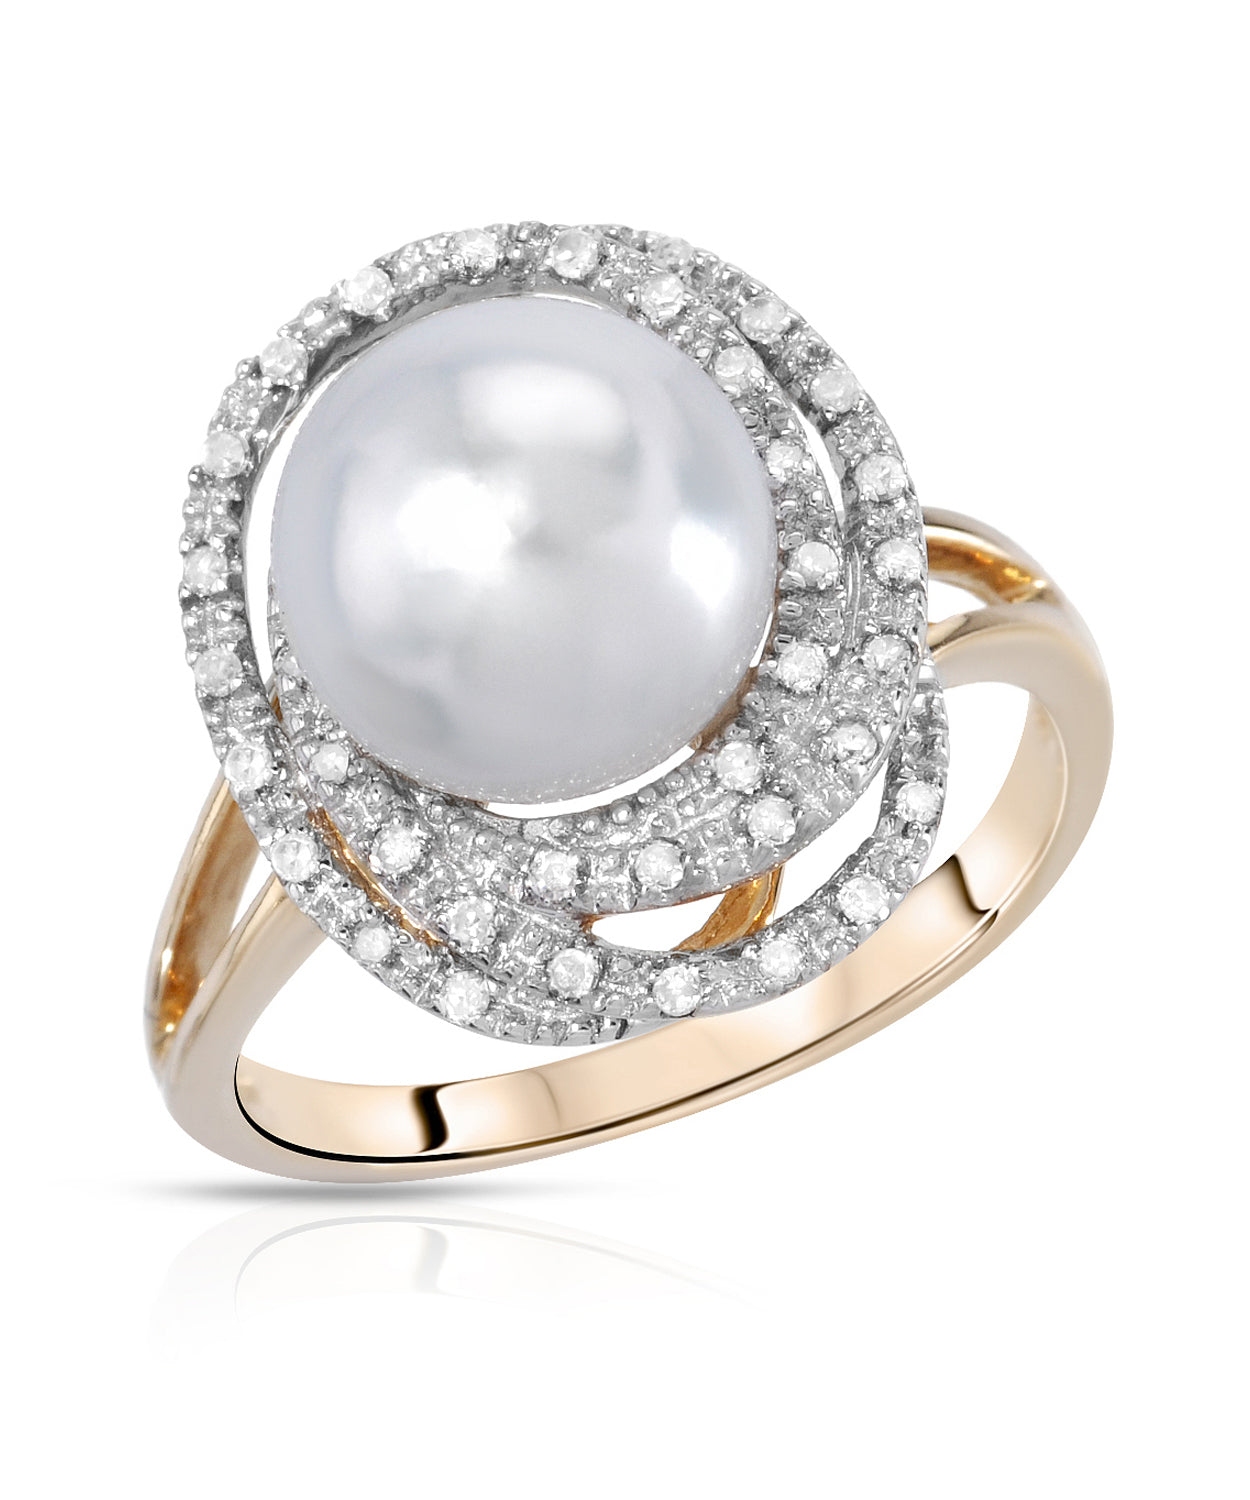 Natural Freshwater Pearl and Diamond 14k Gold Halo Ring View 1